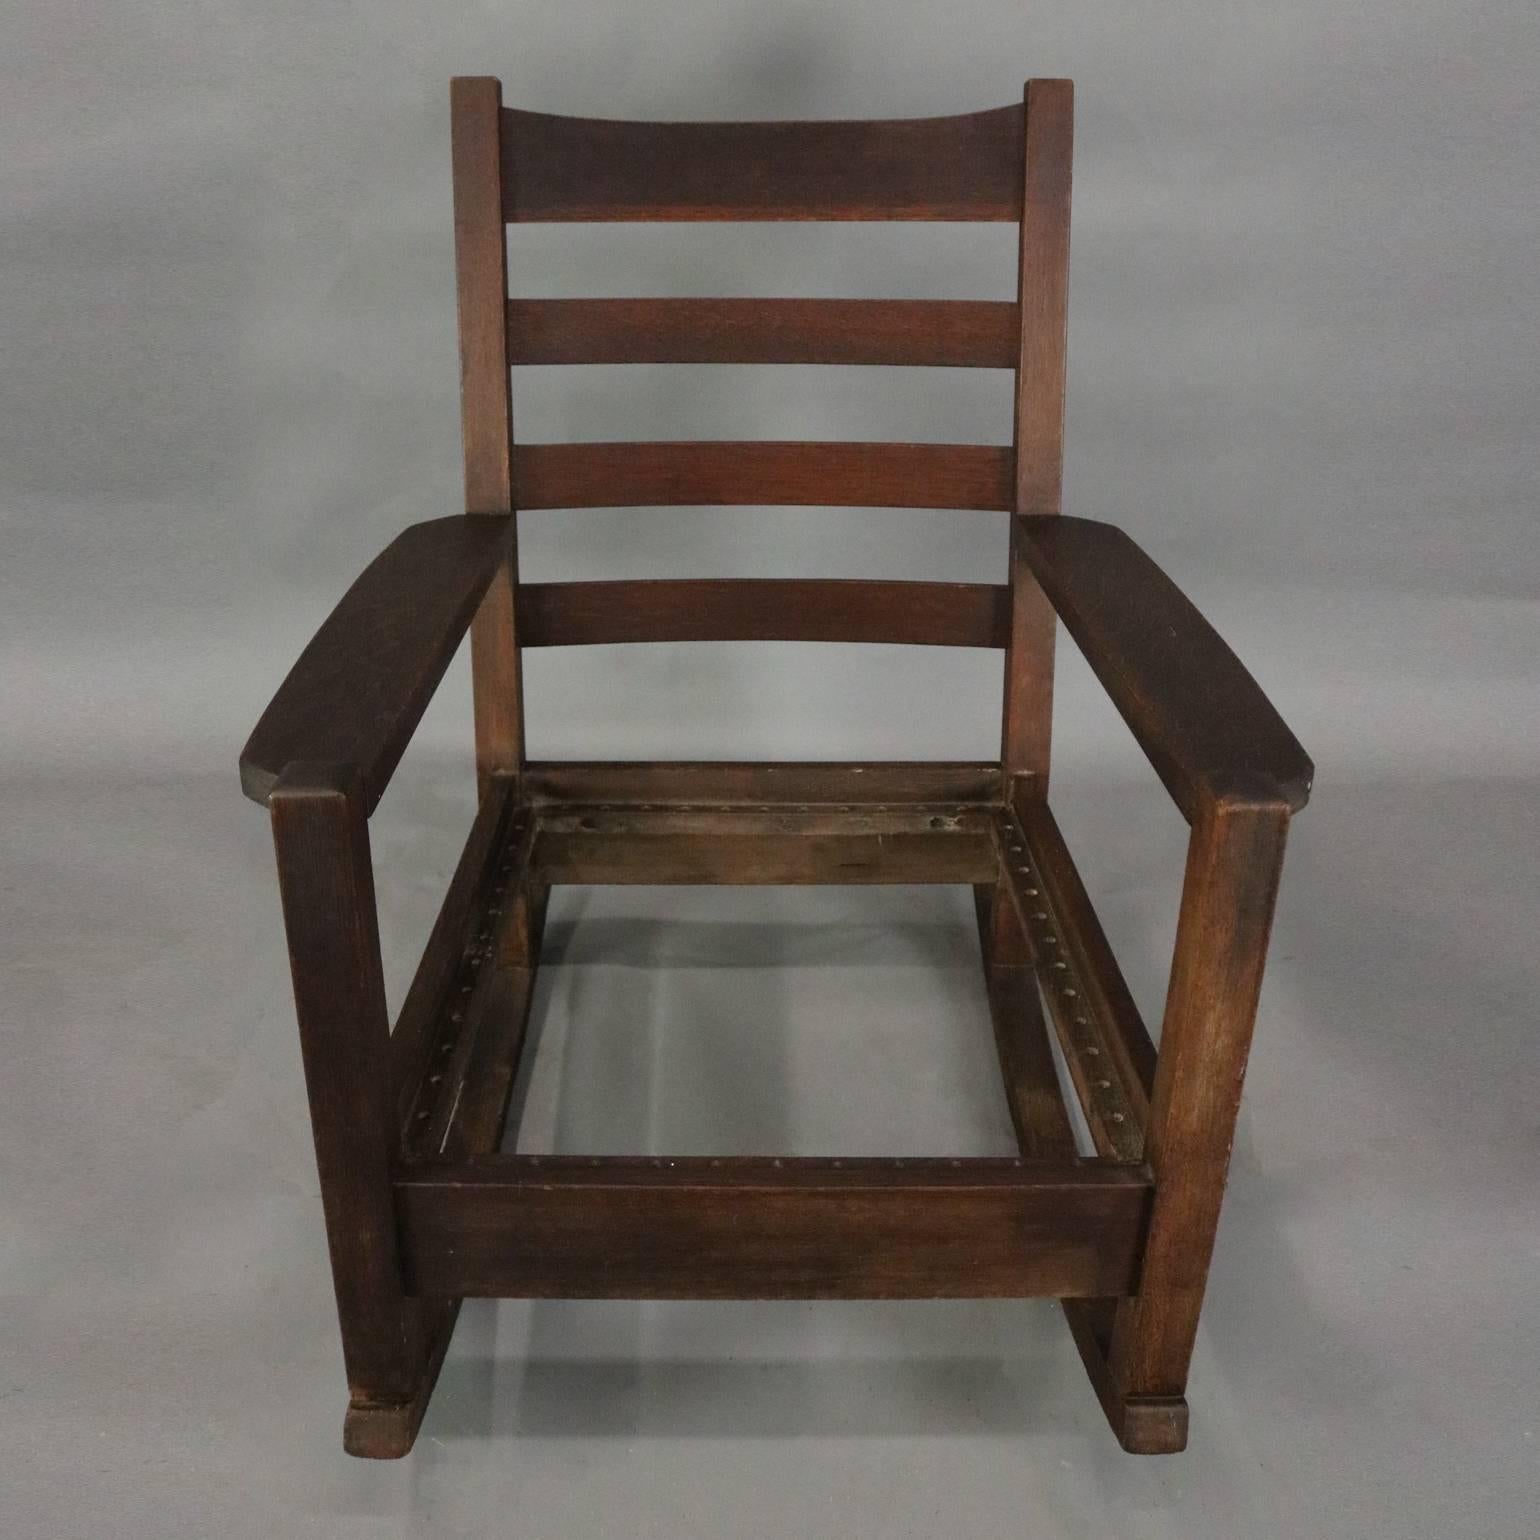 Antique early Arts and Crafts signed Gustav Stickley oversized rocking chair features Mission oak slat-back frame, circa 1910

Measures: 39